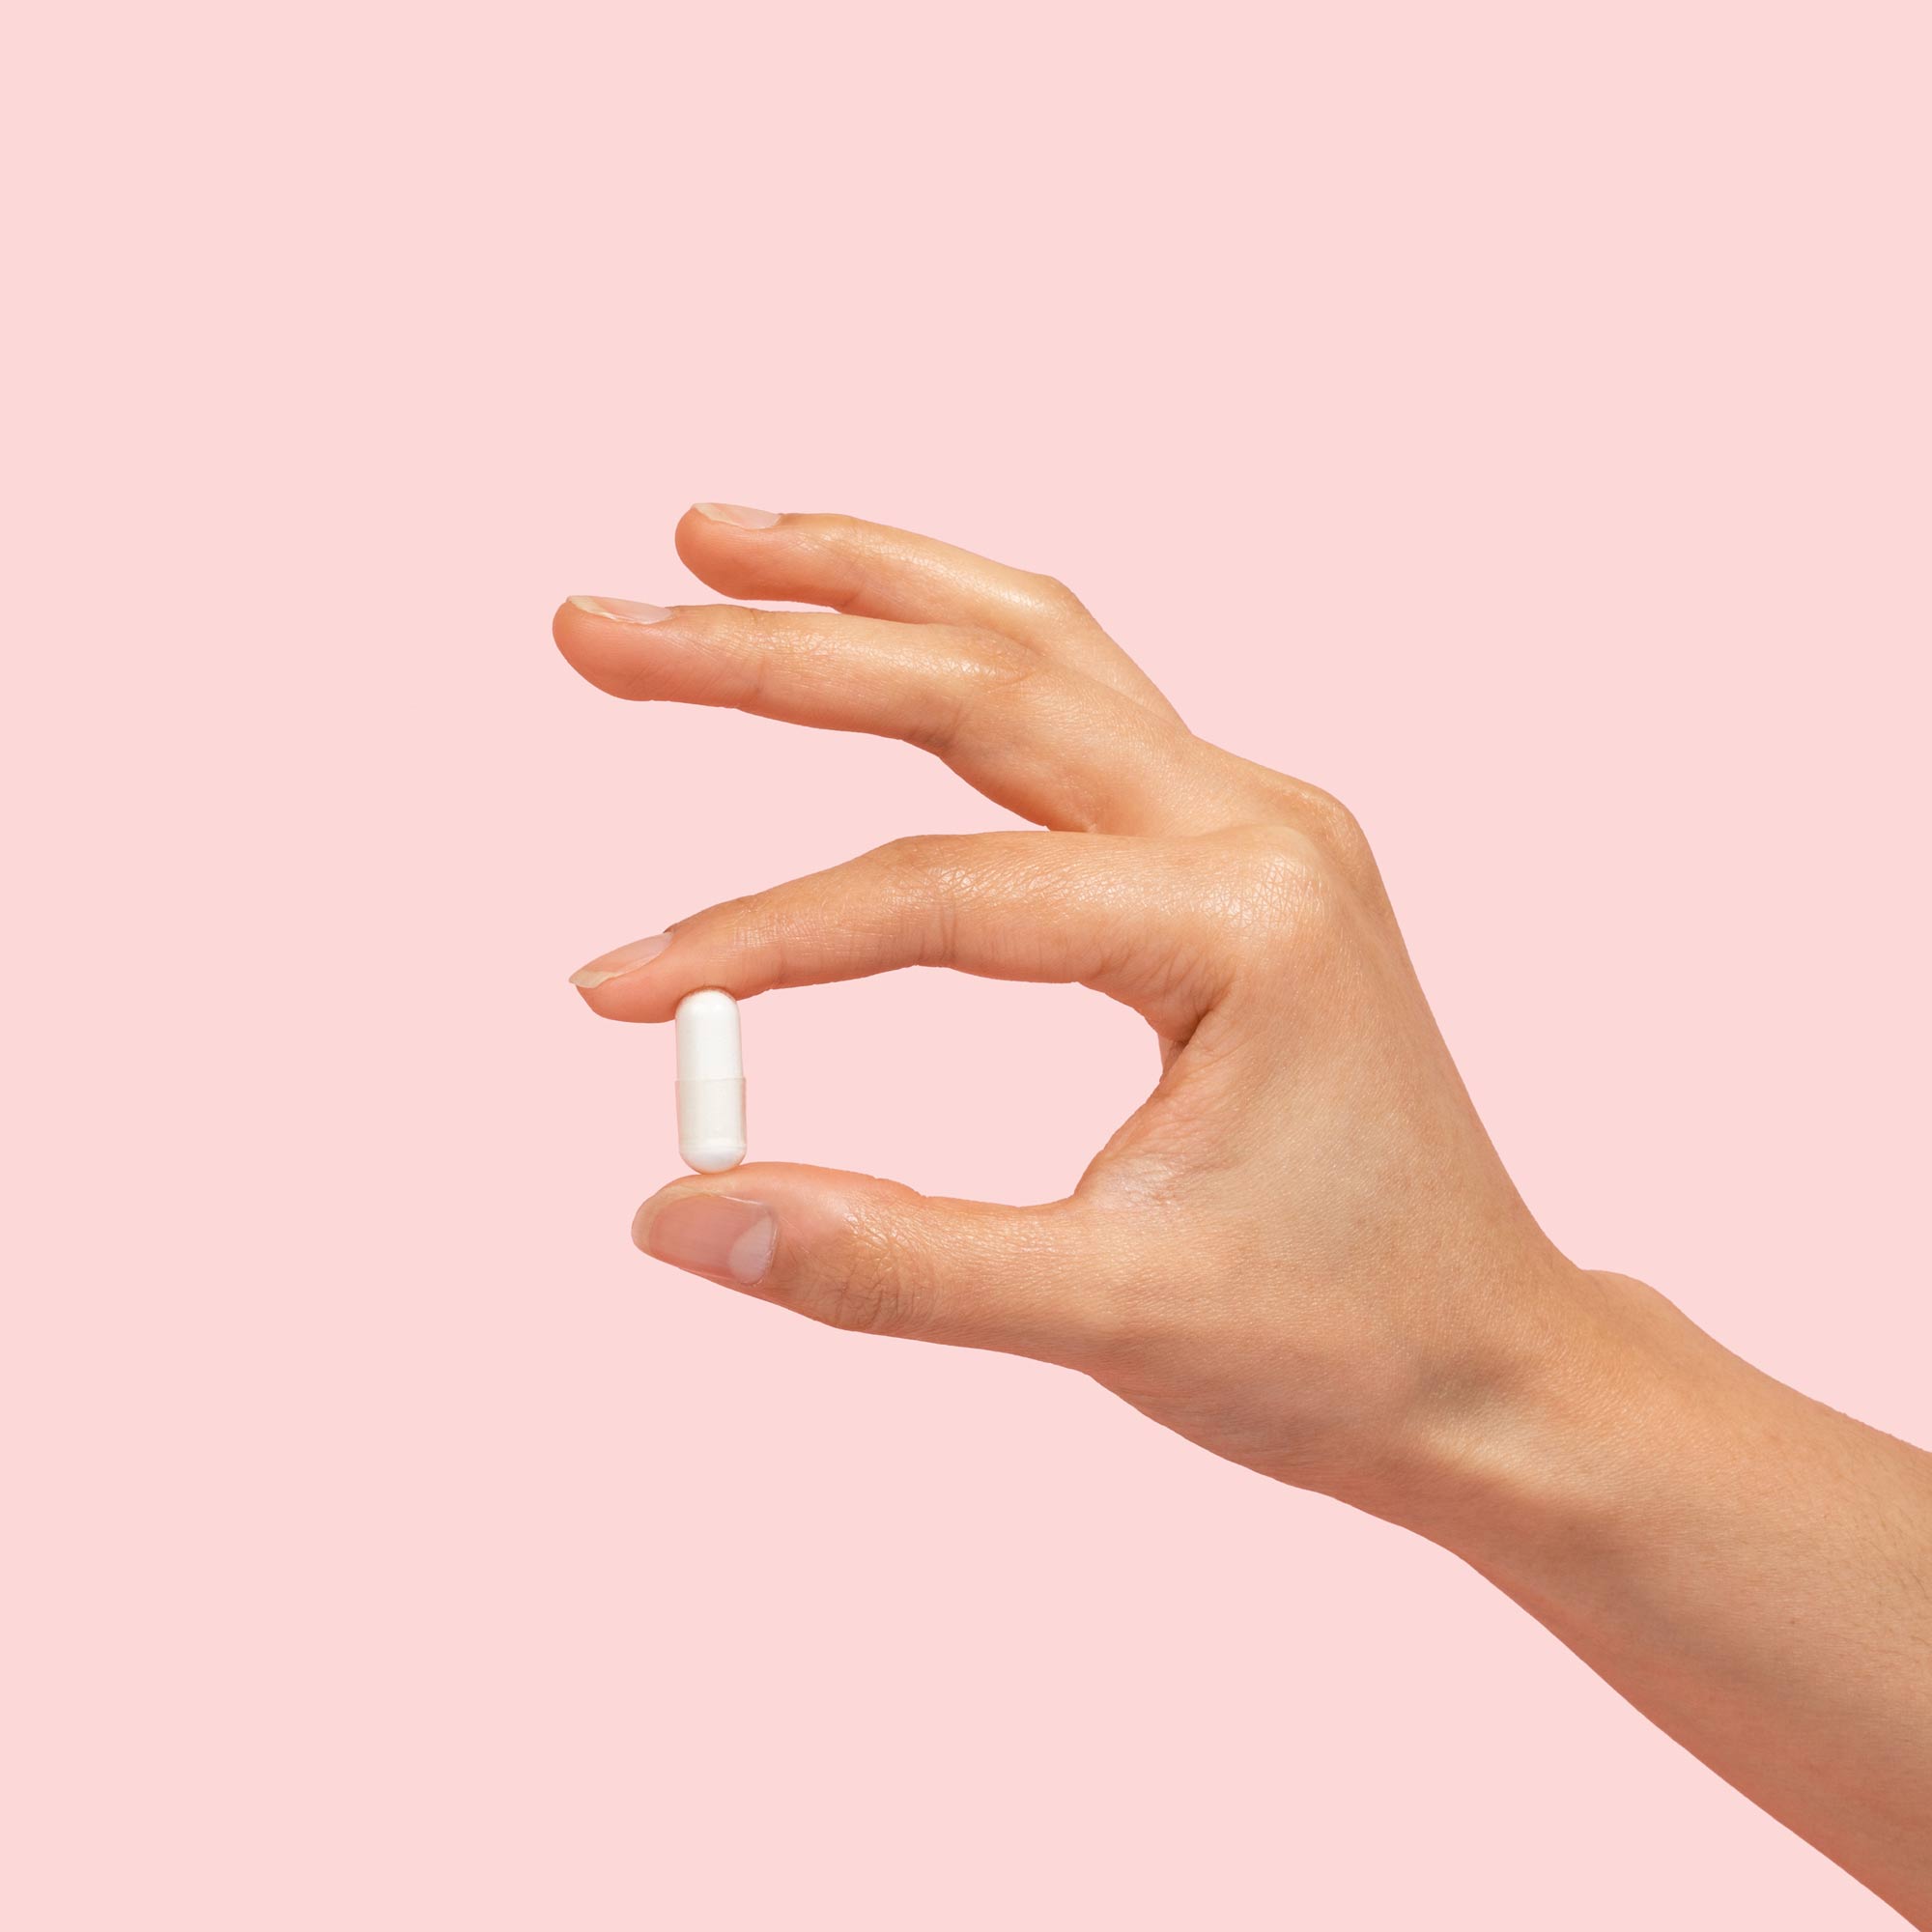 Hand holding lysine capsule on pink background